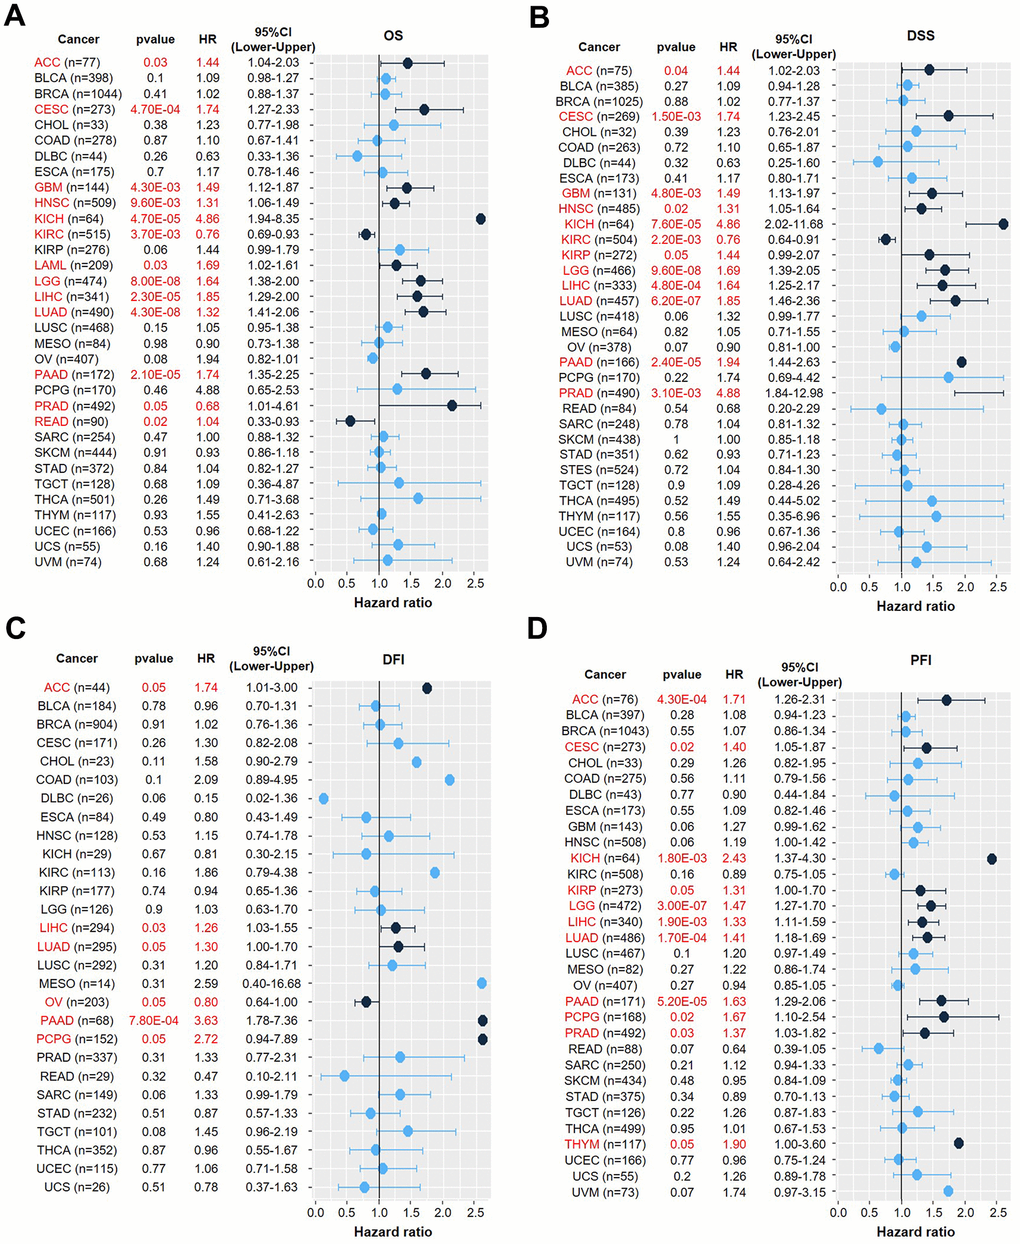 Univariate Cox regression analysis of the correlation between LDHA expression and prognosis in 33 different tumors. (A) Univariate Cox regression analysis of the correlation between LDHA expression and OS in different cancer types. (B) Univariate Cox regression analysis of the correlation of LDHA expression with DSS in different cancer types. (C) Univariate Cox regression analysis of the correlation between LDHA expression and DFI in different cancer types. (D) Univariate Cox regression analysis of the correlation of LDHA expression with PFI in different cancer types. The red words and black dots indicate that the gene is a risk factor in the corresponding tumor.